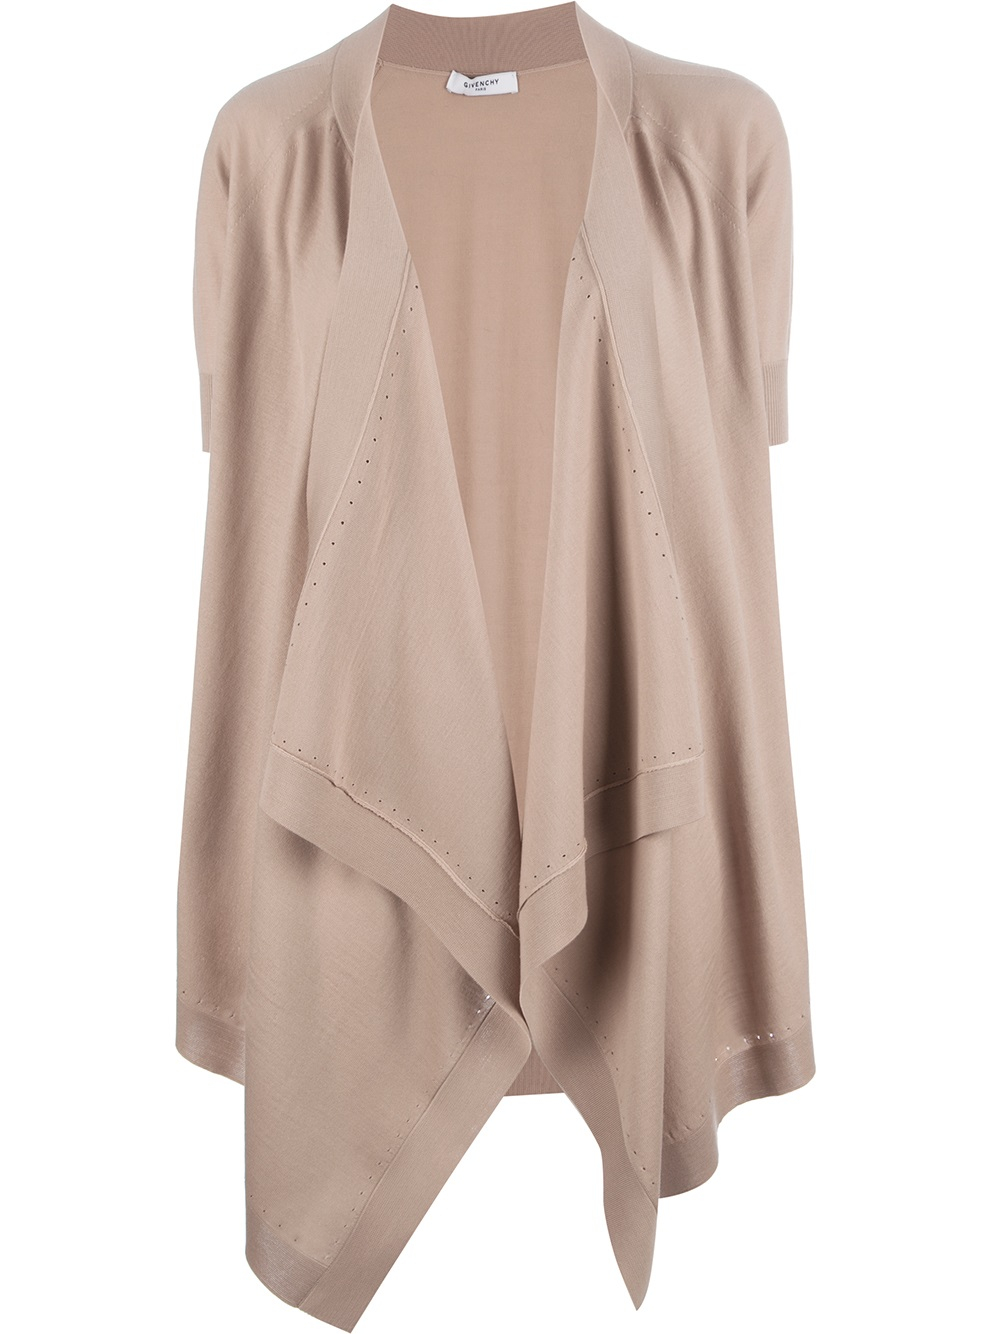 Lyst - Givenchy Asymmetric Ruffled Cardigan in Natural